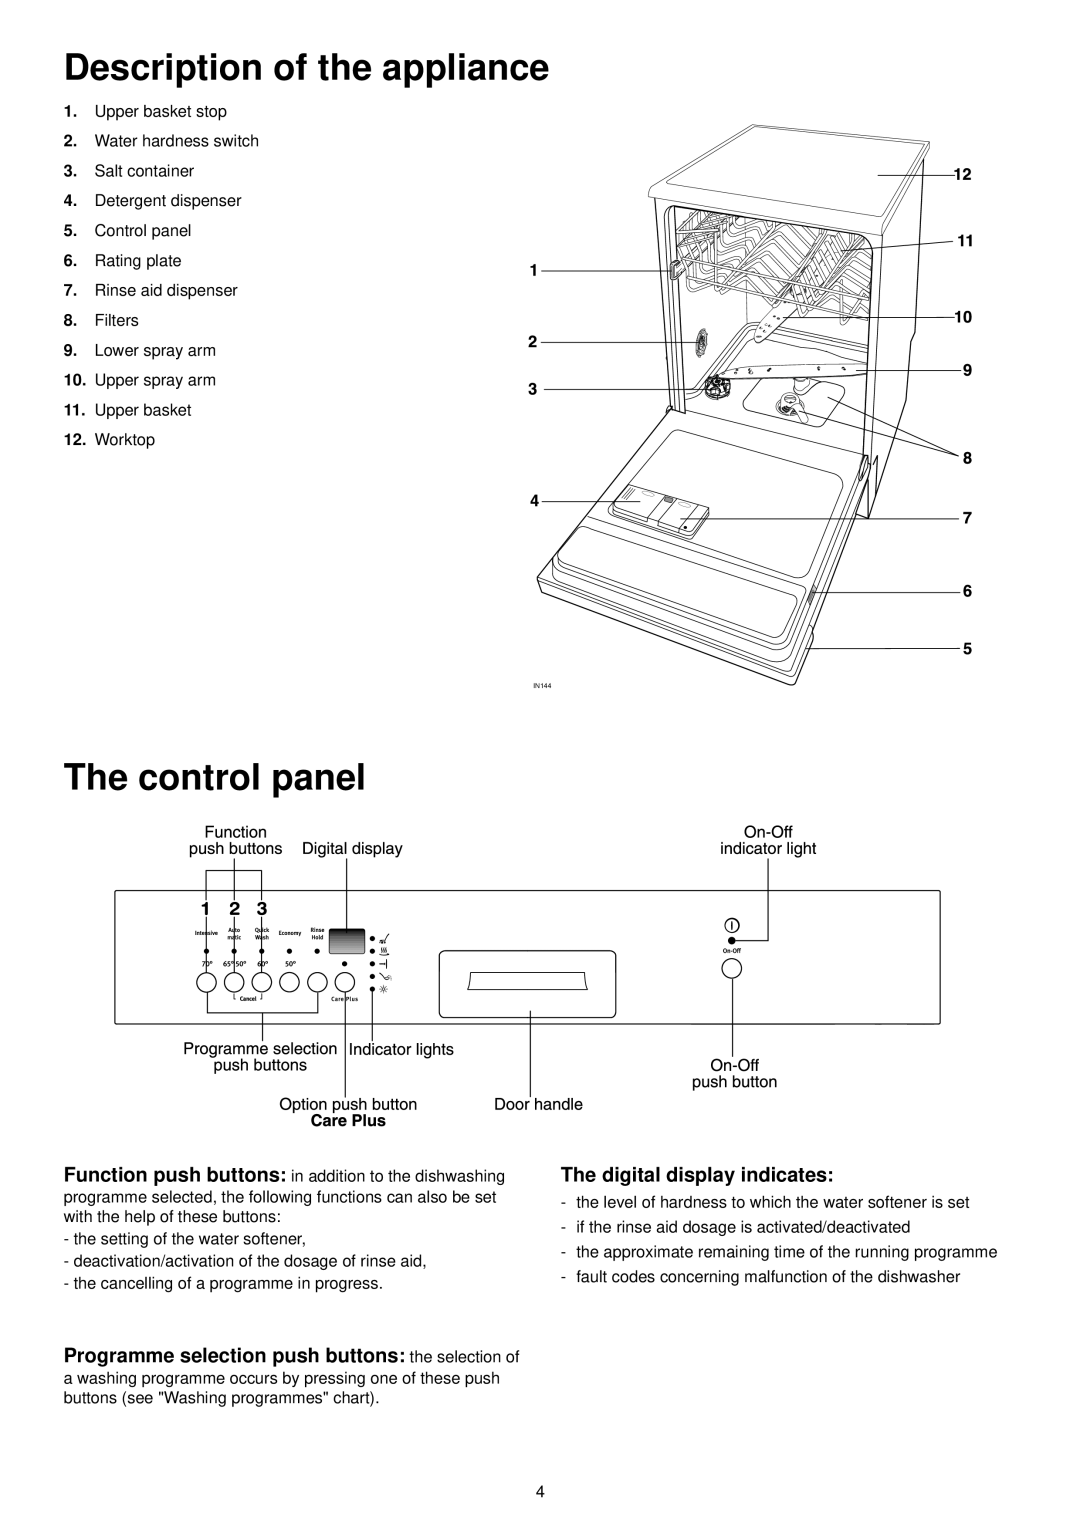 Zanussi ZSF 6160 manual Description of the appliance, The control panel, The digital display indicates 